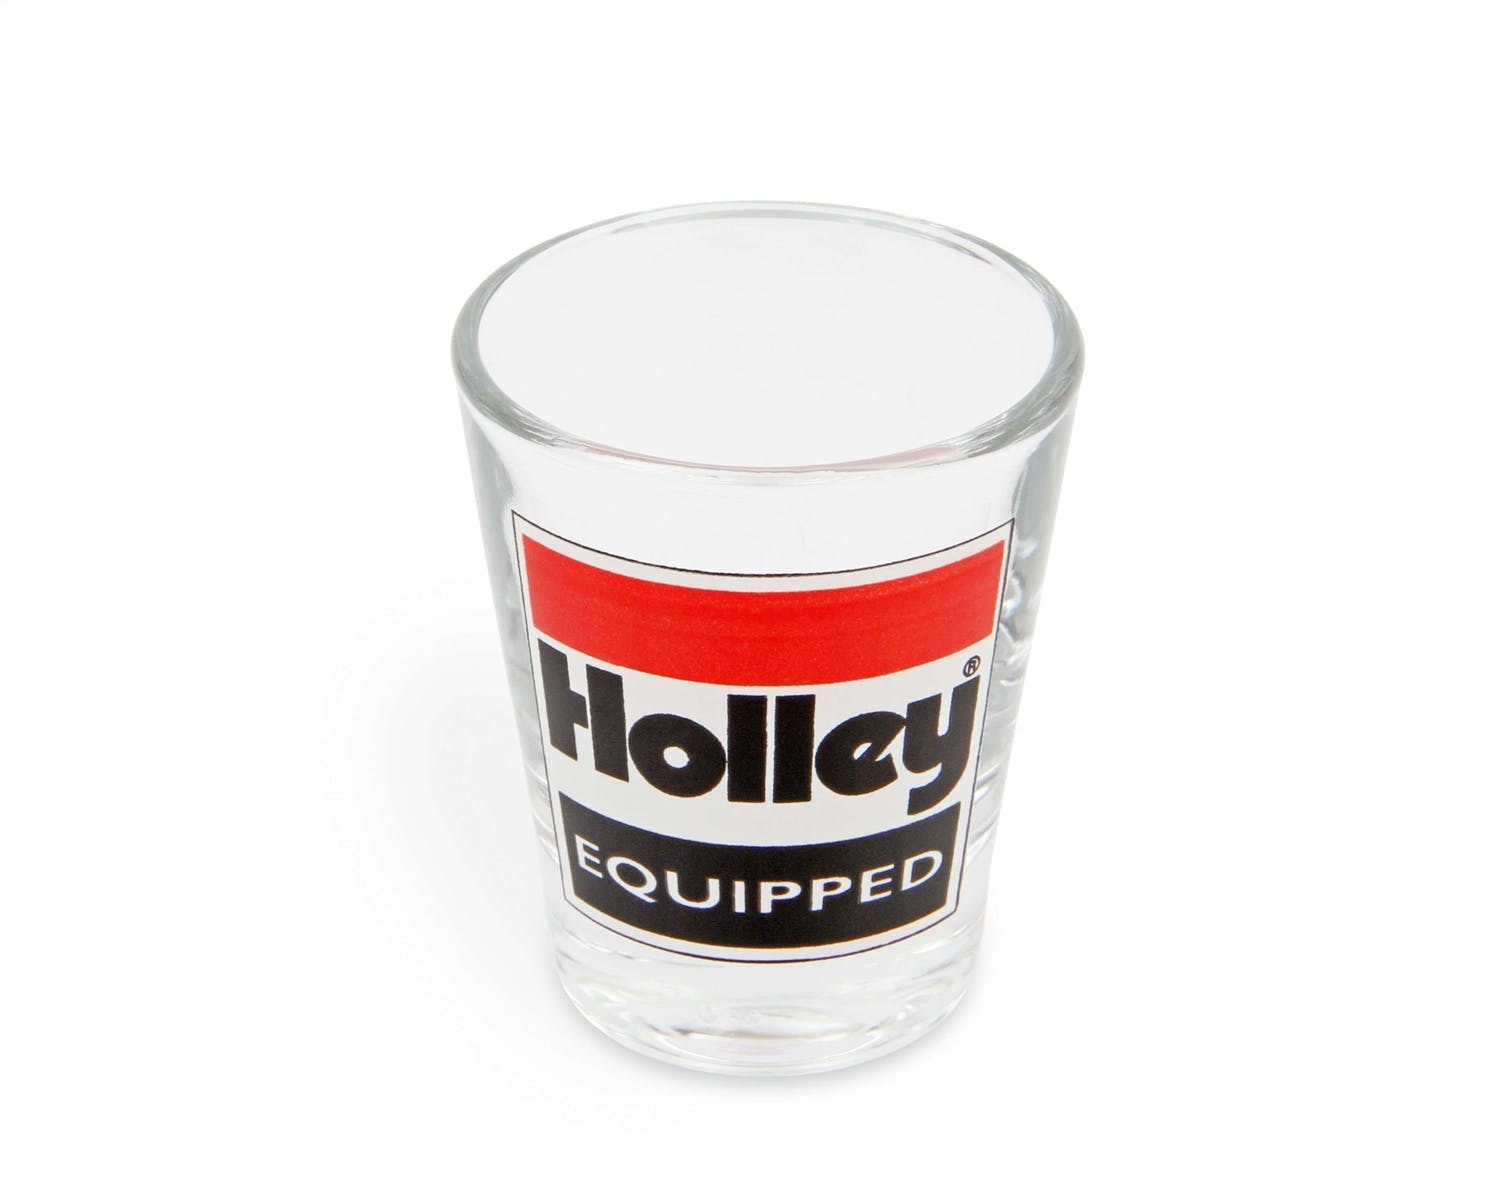 Holley 36-487 2 OZ SHOT GLASS W/HOLLEY EQUIPPED LOGO